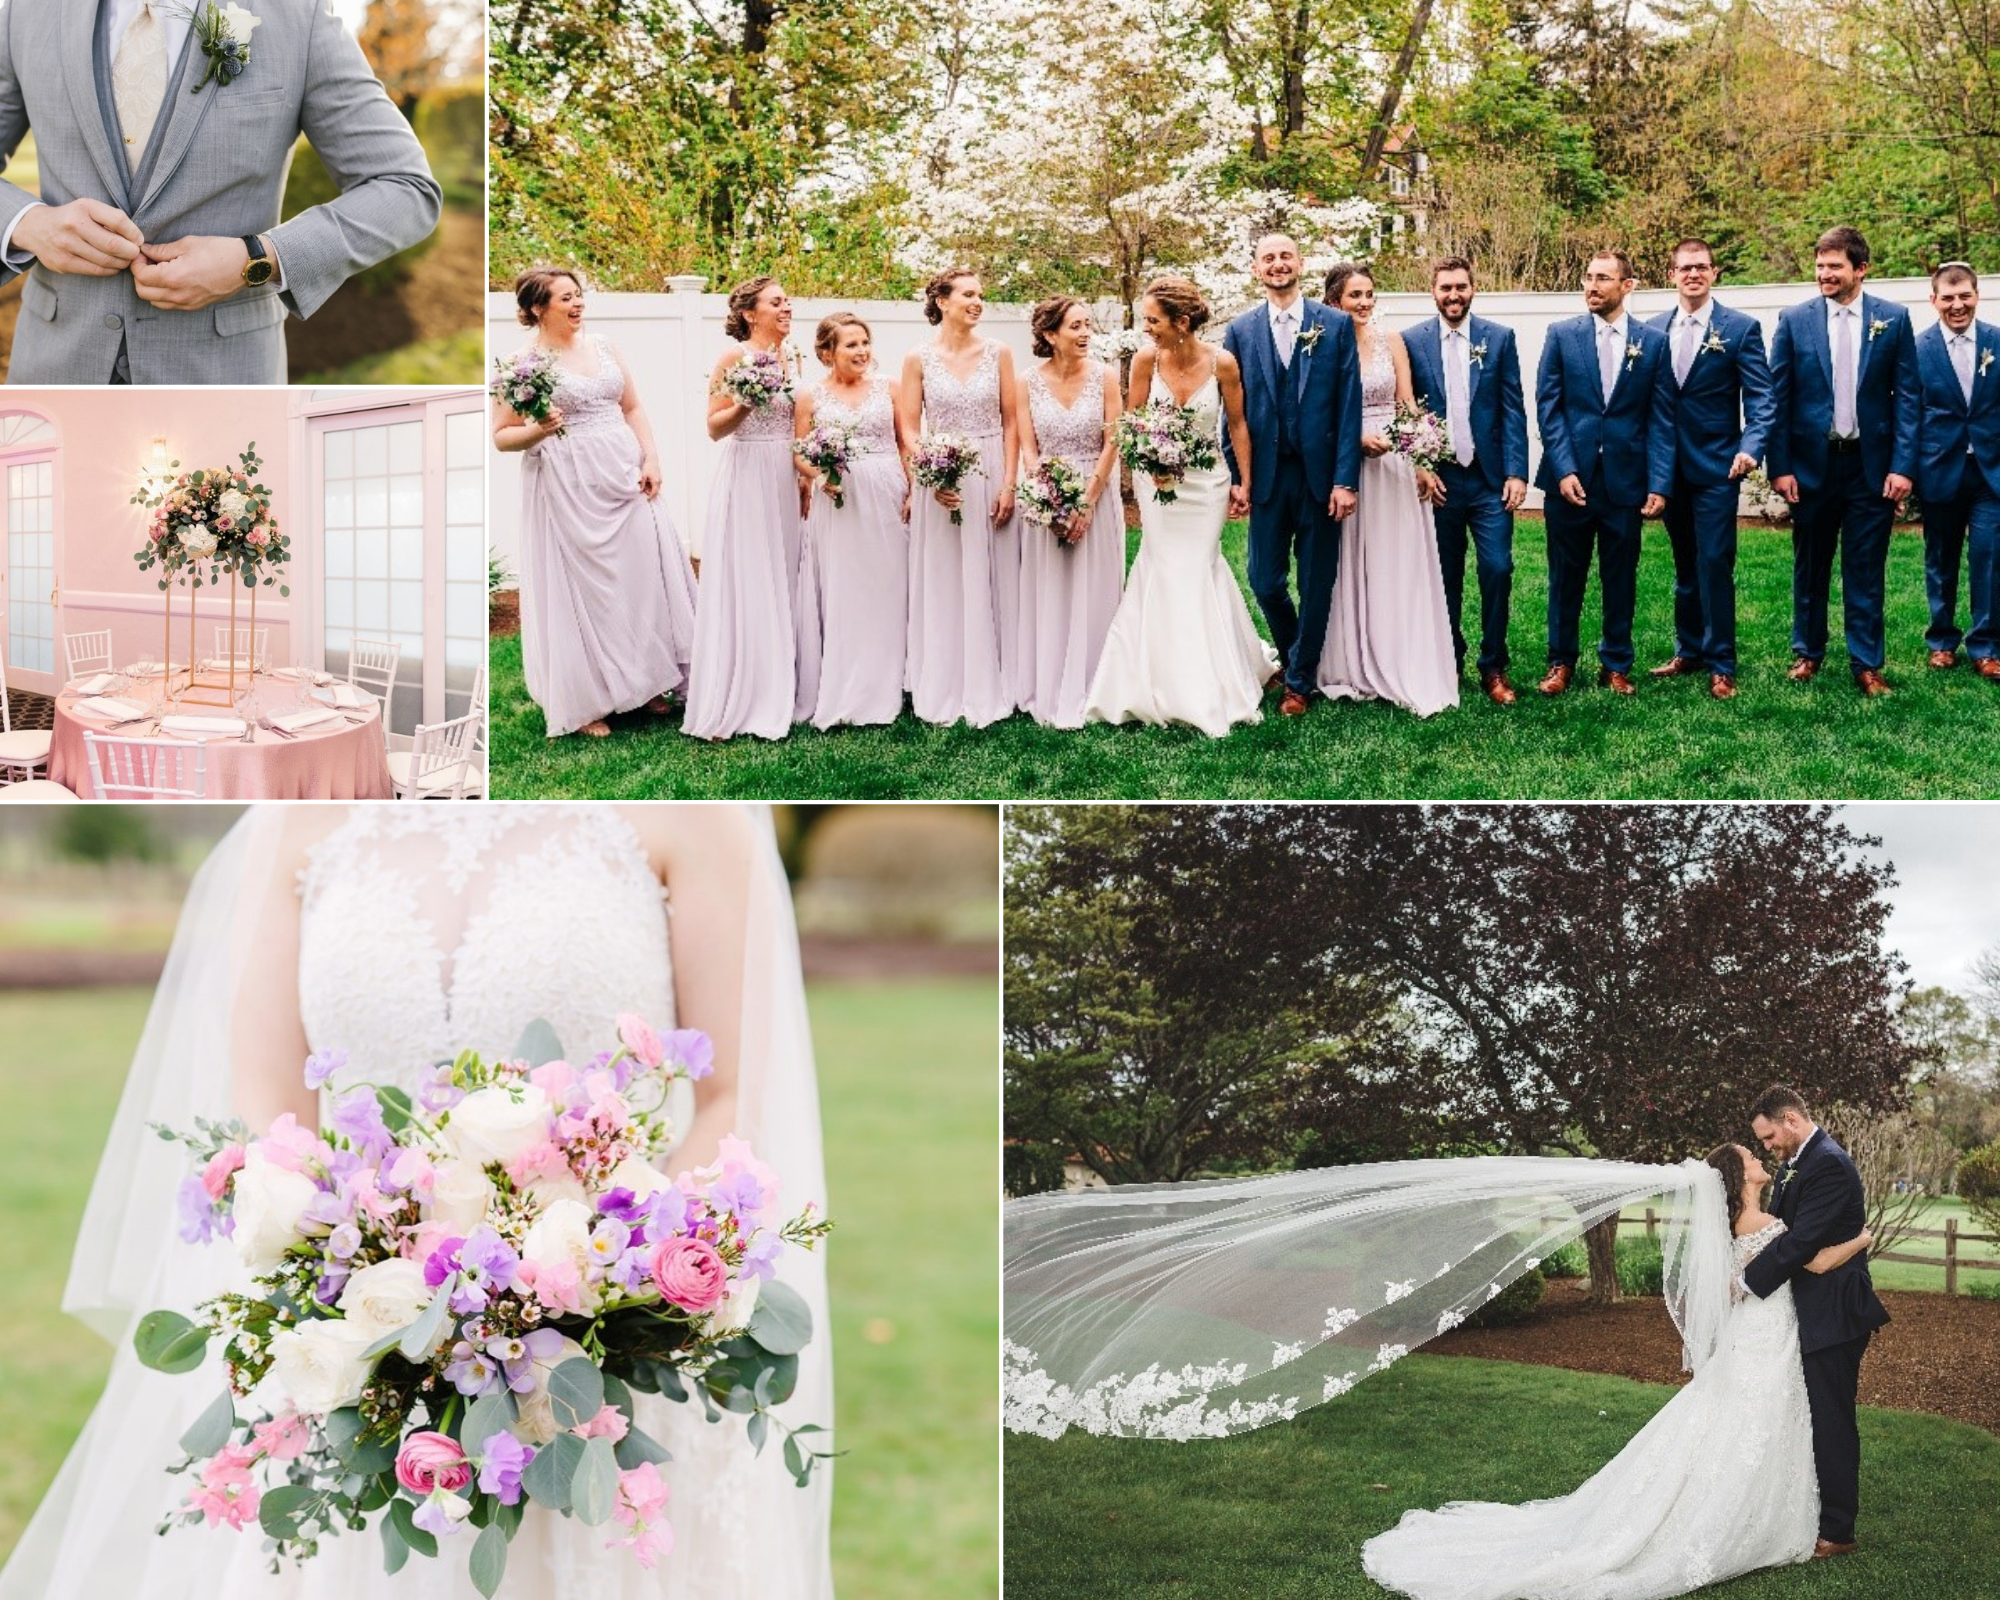 Spring weddings - a favorite time of year for for a wedding in Massachusetts